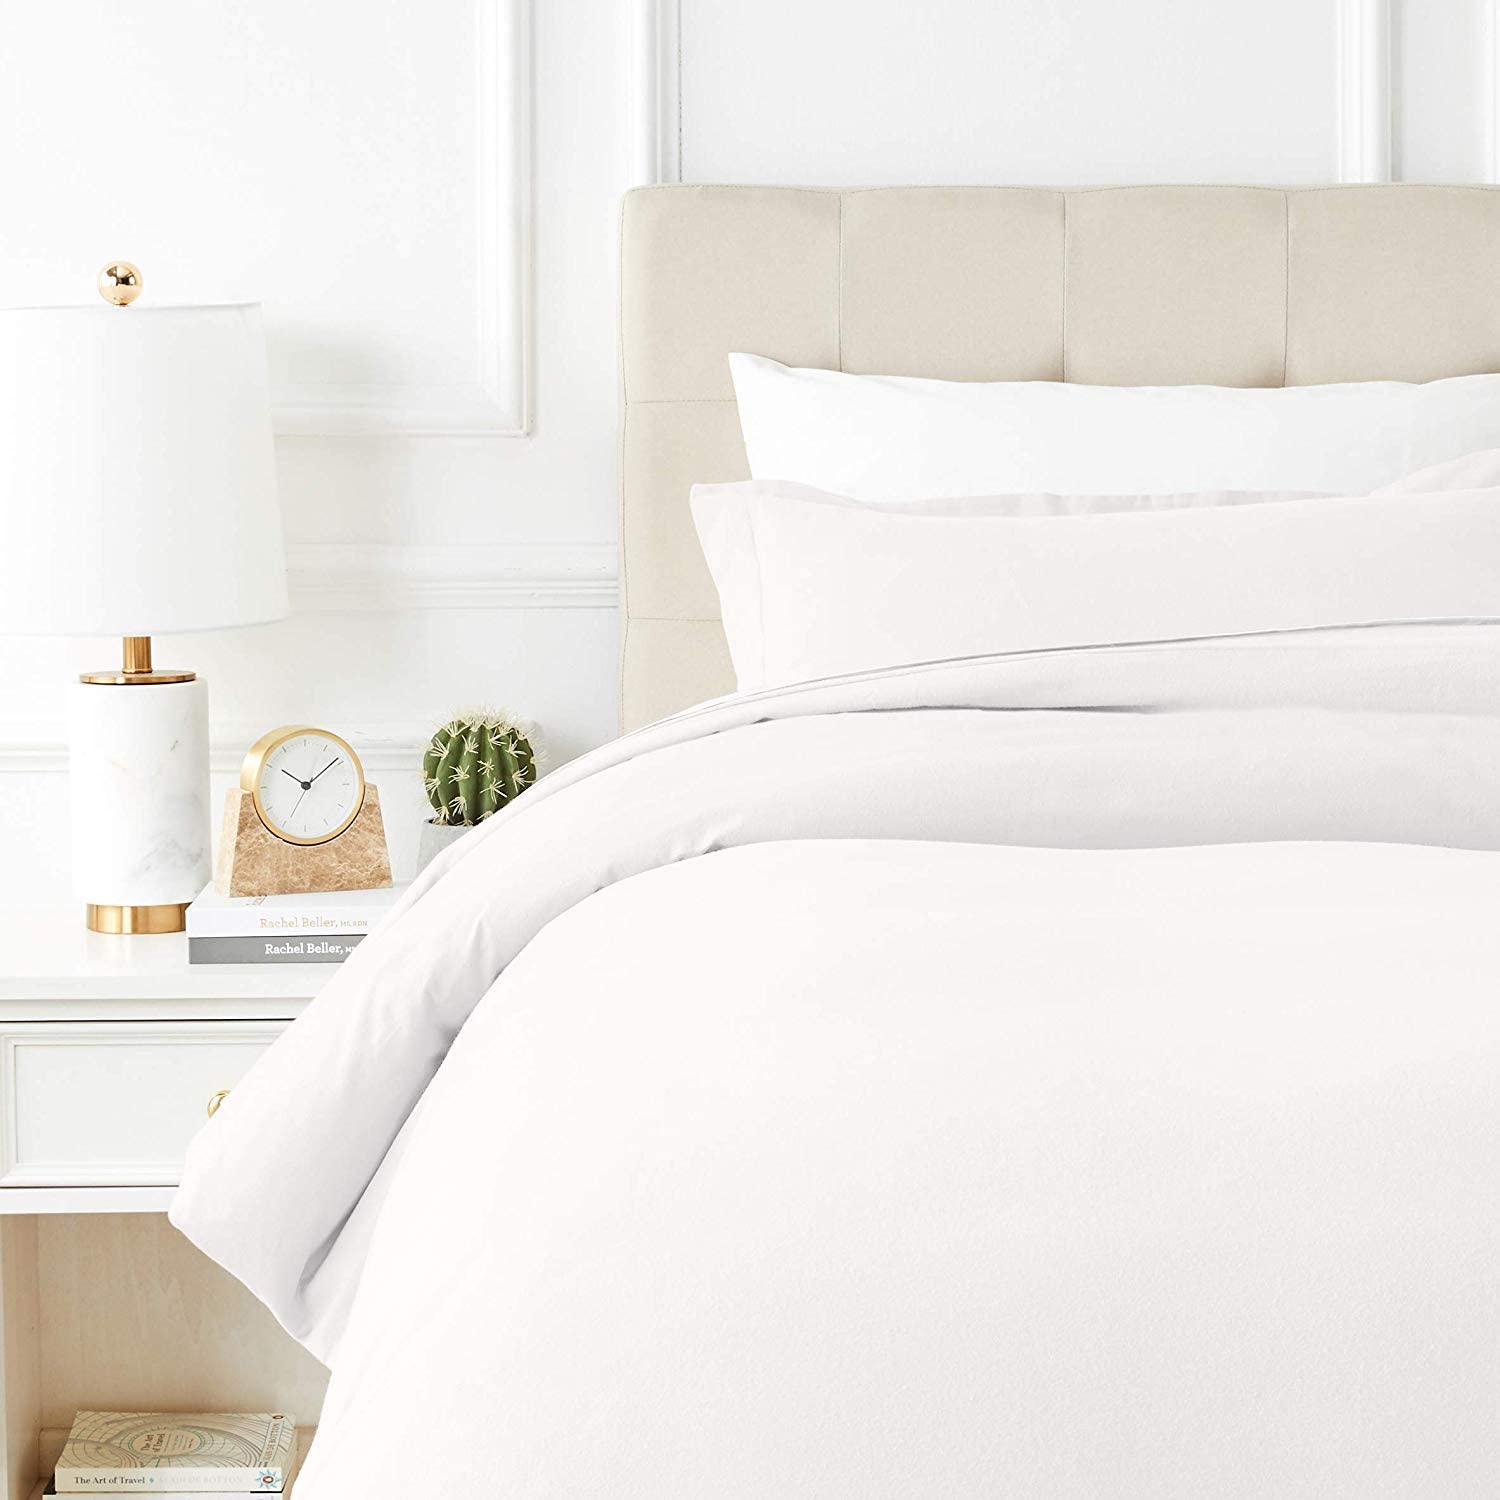 Price:$82.99  Sheets 600 Thread Count 3Pc Duvet Cover Set, 100% Long Staple Egyptian Cotton Quilt Cover, Silky Soft, Breathable with Hidden Zipper Closure(White, Oversized King) : Home & Kitchen